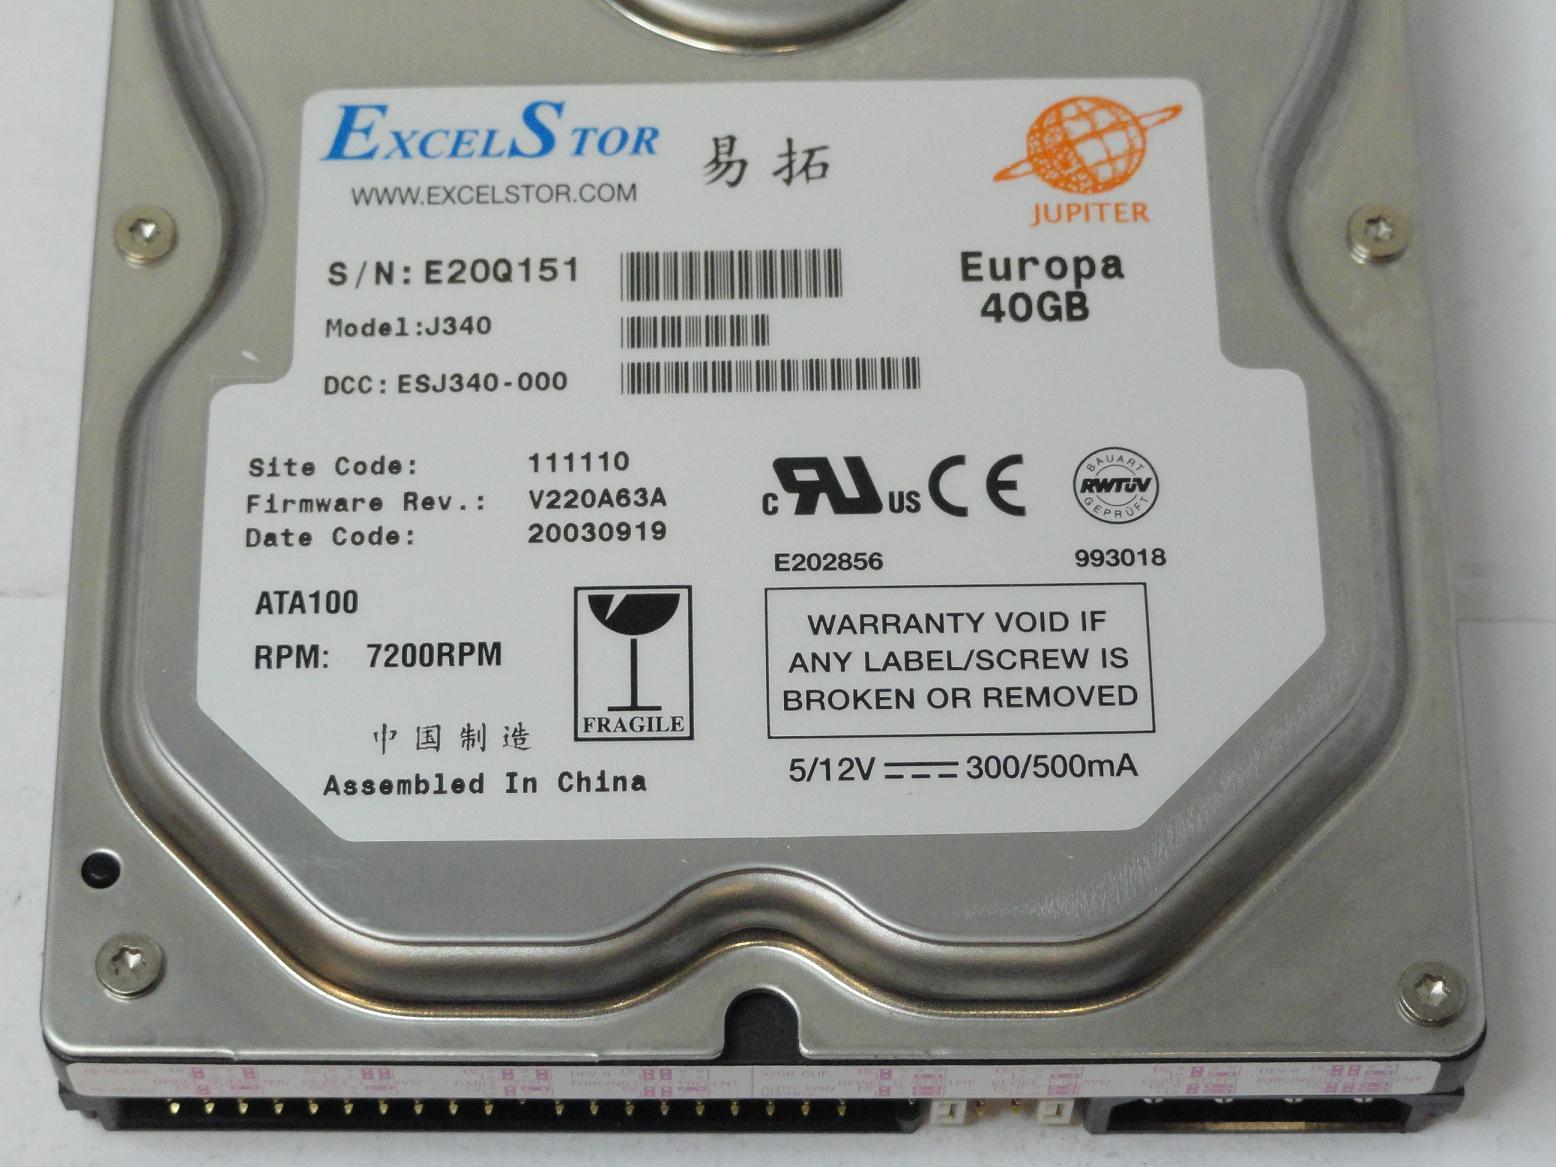 MC3405_J340_Excelstor 40GB IDE 7200rpm 3.5in HDD - Image3